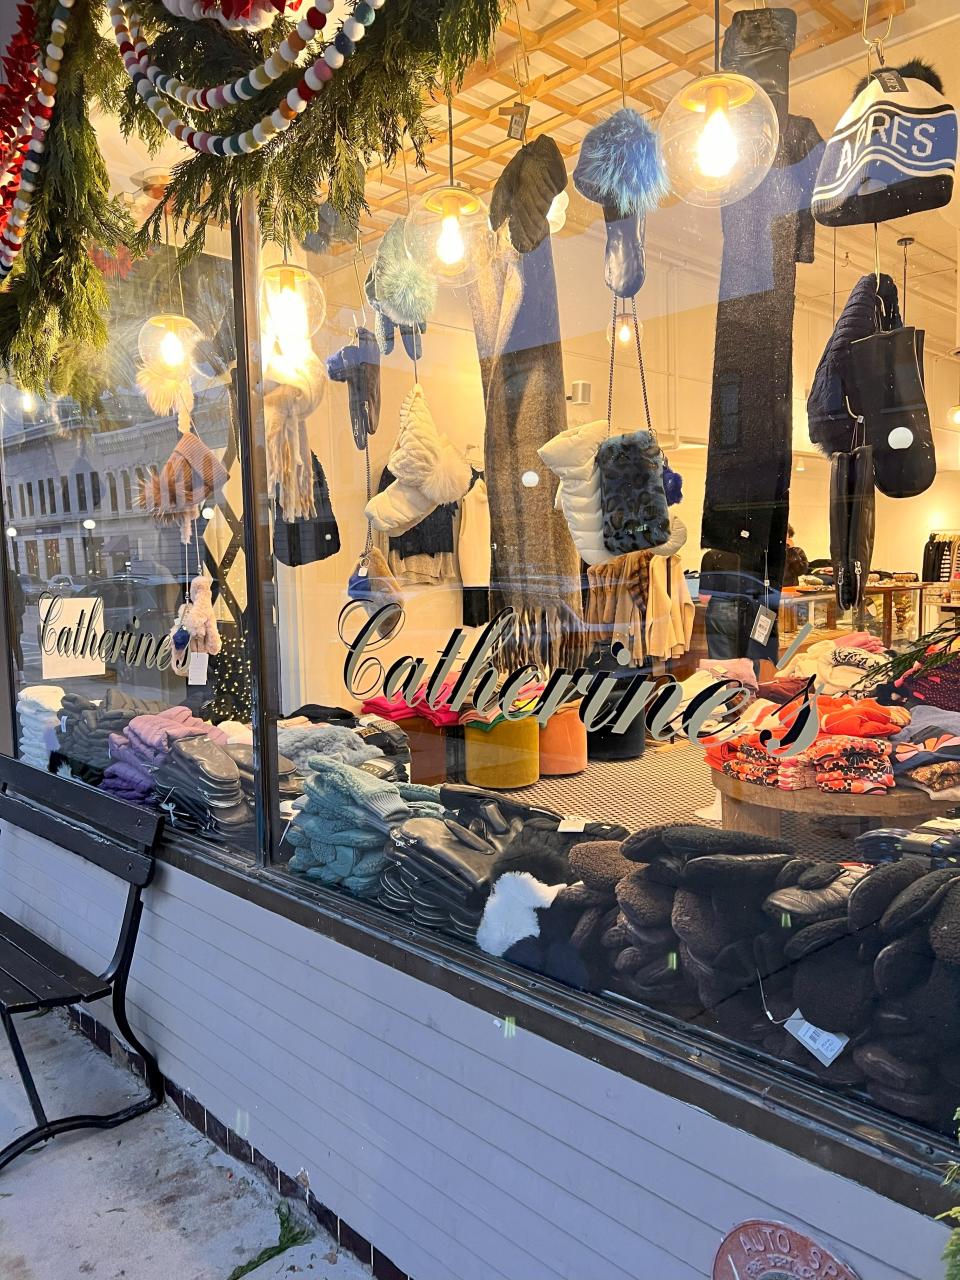 Catherine's supplies brand-name dresses, jeans & accessories for women located at 7 S Dubuque St. Catherine's is open 10 a.m. to 5:30 p.m.Monday through Friday, 10 a.m. to 5 p.m. on Saturday, and 12 p.m. to 5 p.m. on Sunday.